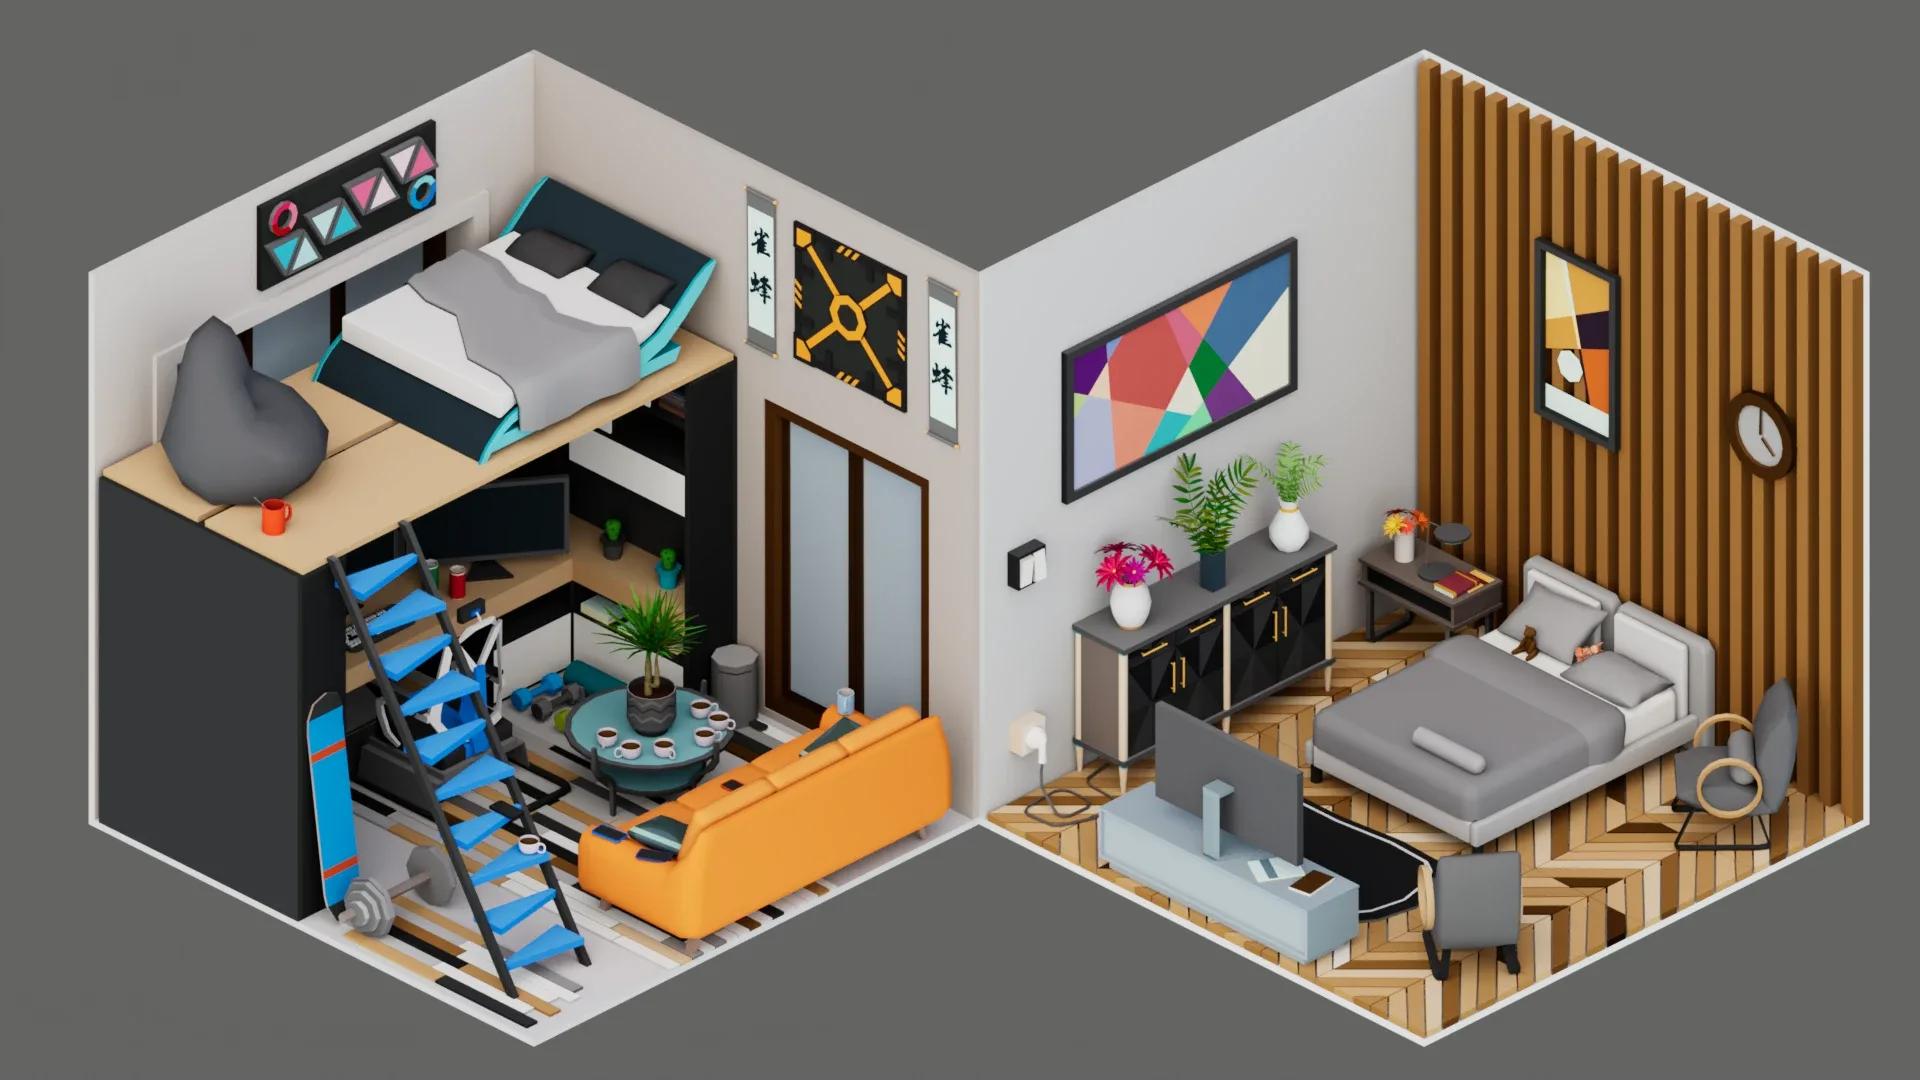 30 Low poly Rooms Interiors 1000+ unique Objects